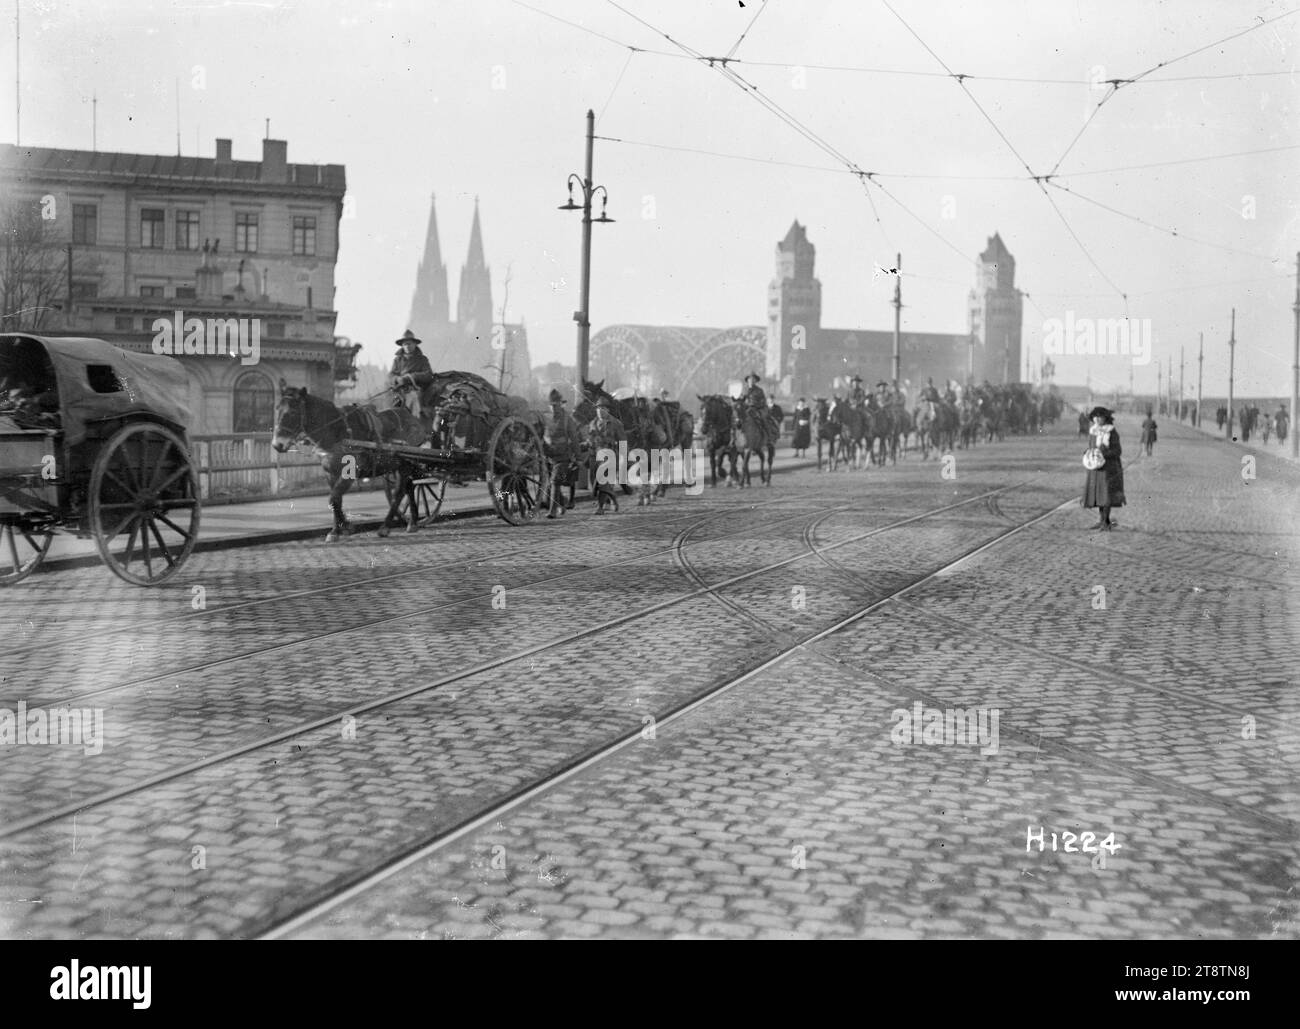 World War I New Zealand mounted troops moving through Cologne, Germany, New Zealand transport and mounted troops passing through Cologne, Germany, as one of the armies of occupation at the end of World War I. In the background is the Hohenzollern Bridge. Photograph taken probably December 1918 Stock Photo